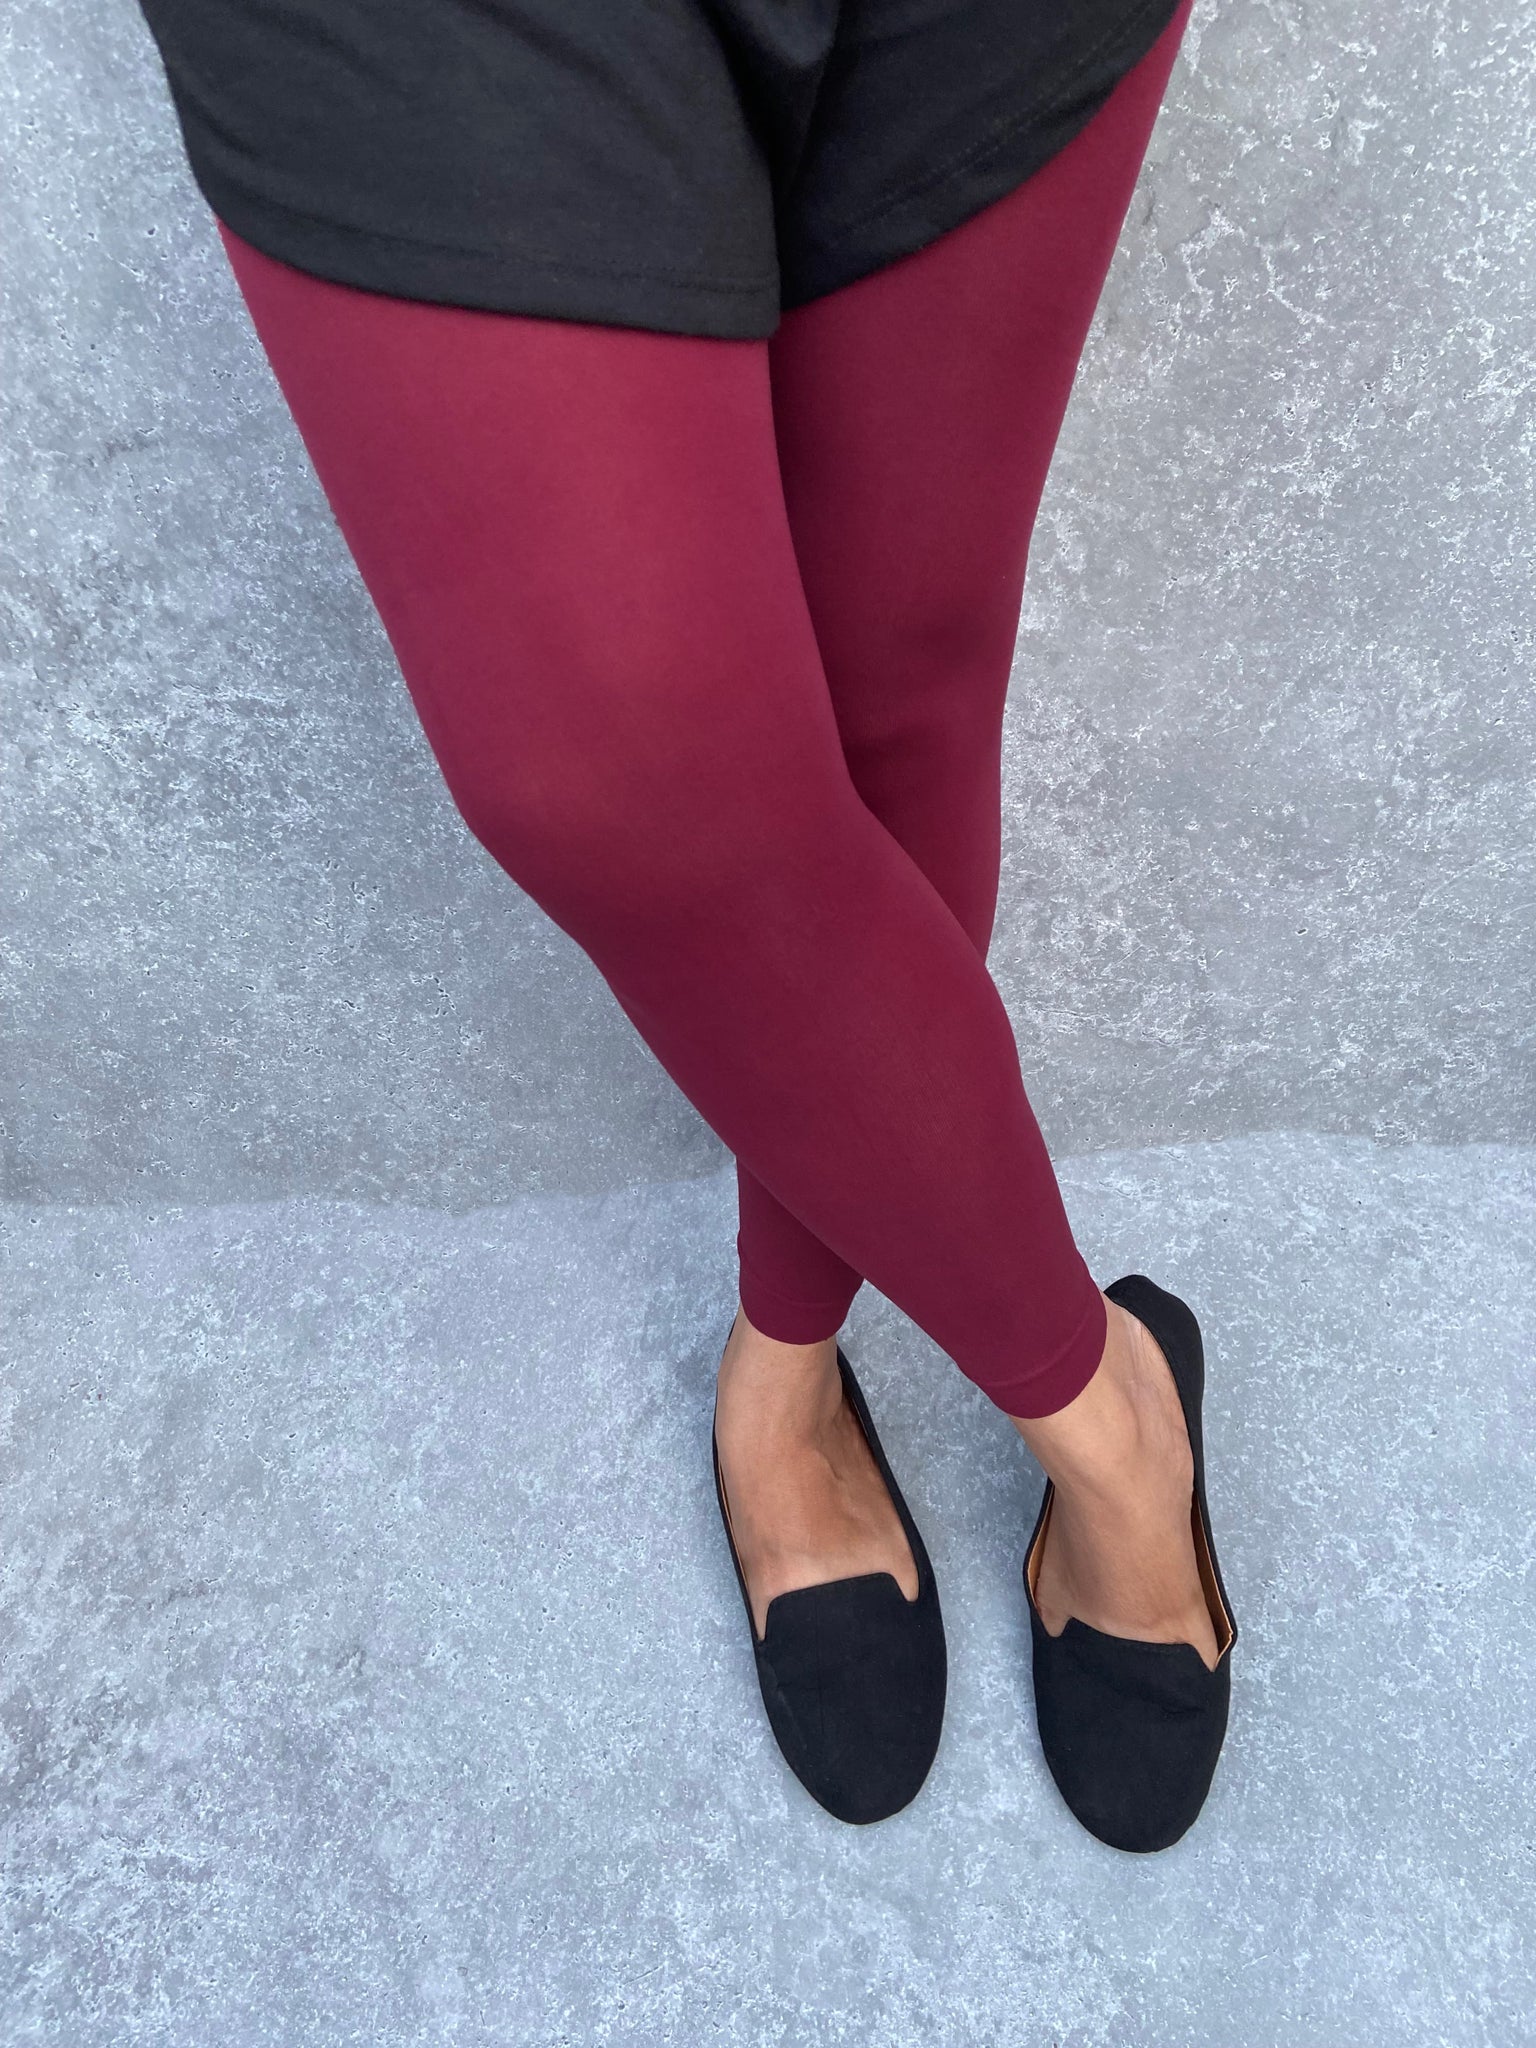 Maroon Red Footless Tights - Thighs the Limit